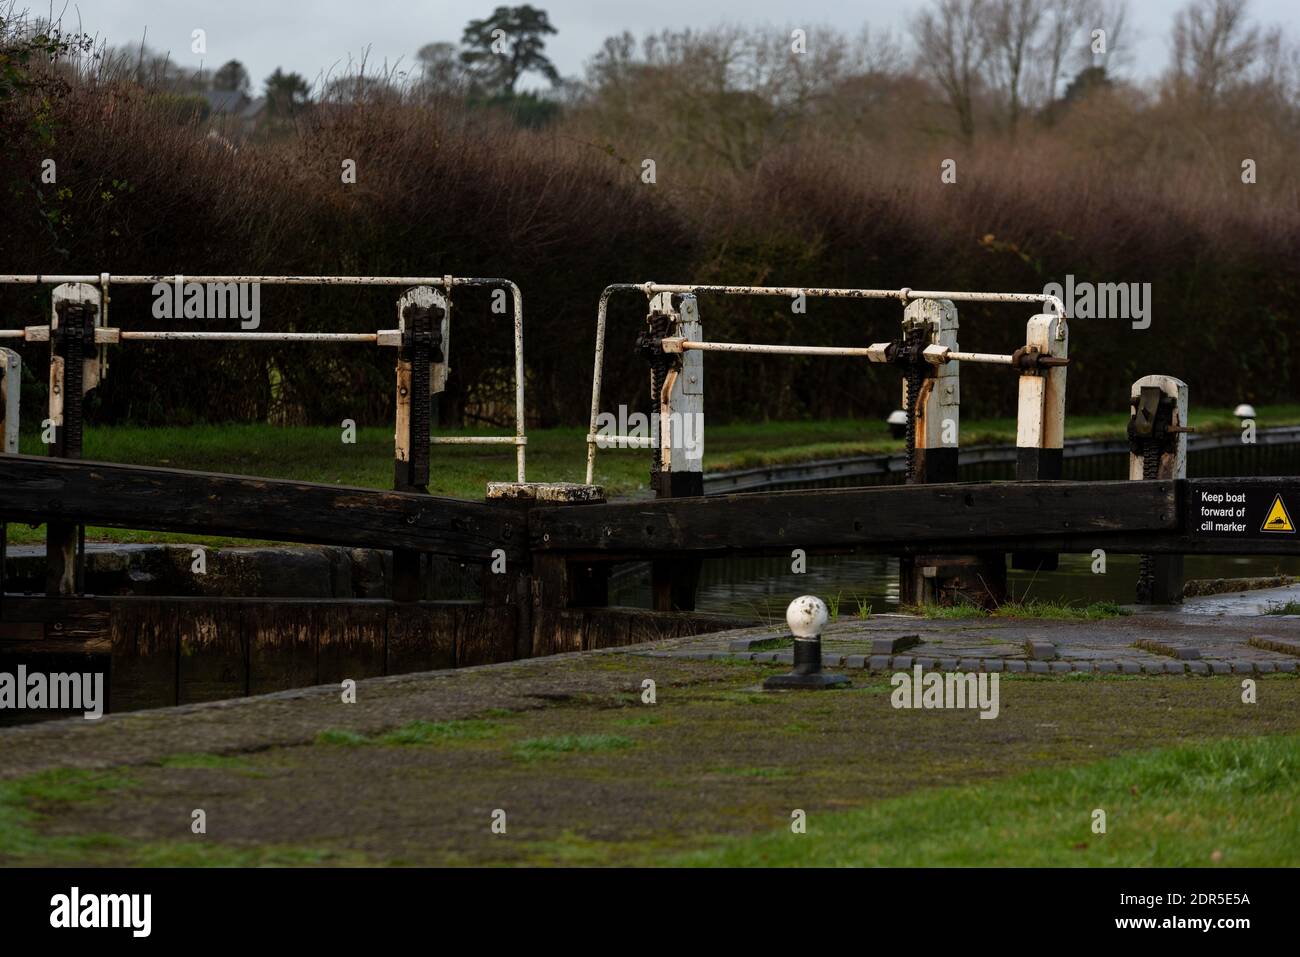 Lock gates for canal shut from 45 degree angle Stock Photo